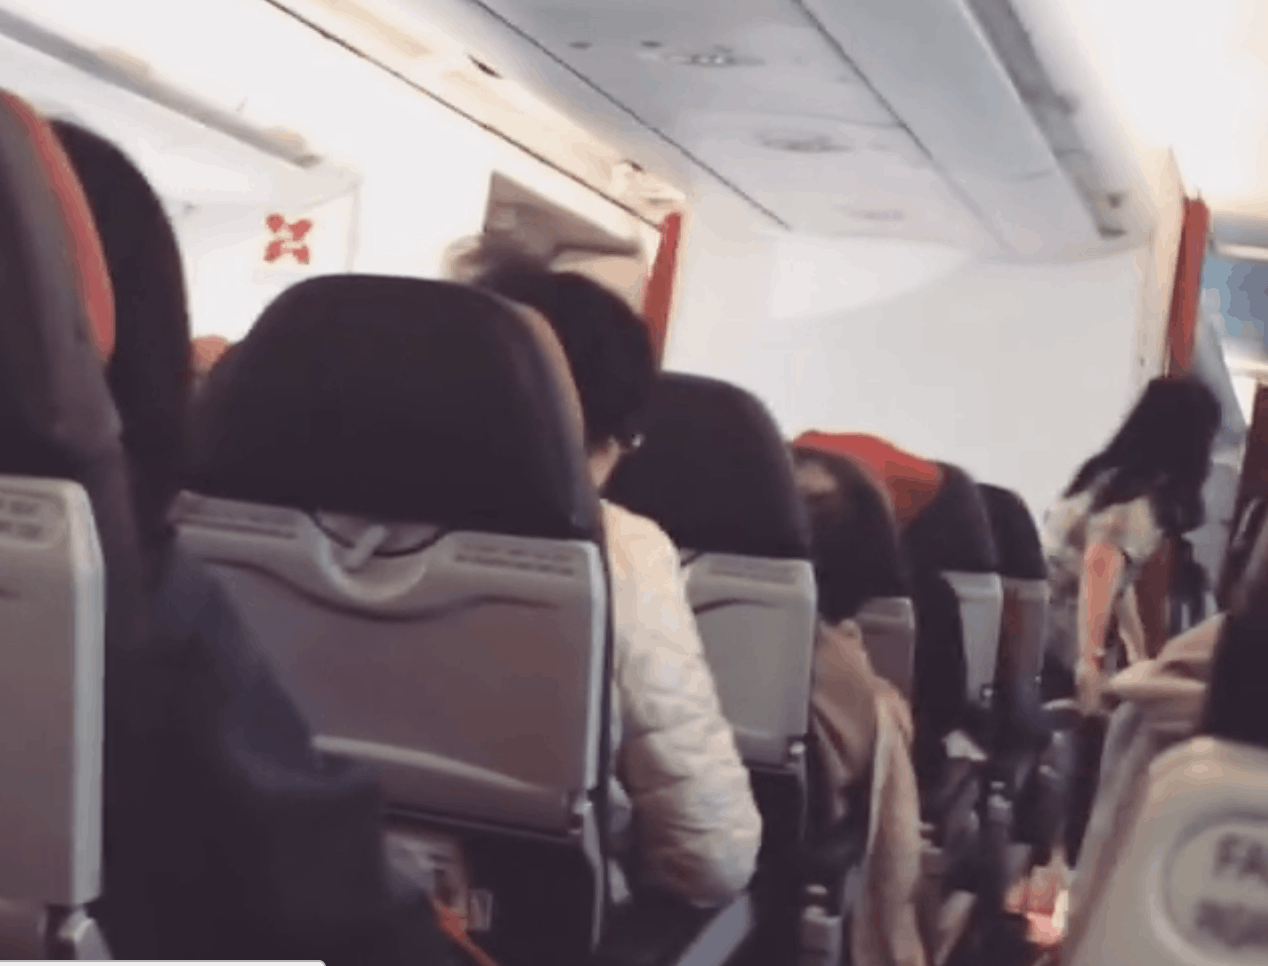 This Plane Started Shaking So Badly That the Pilot Asked Passengers to Start Praying - RELEVANT